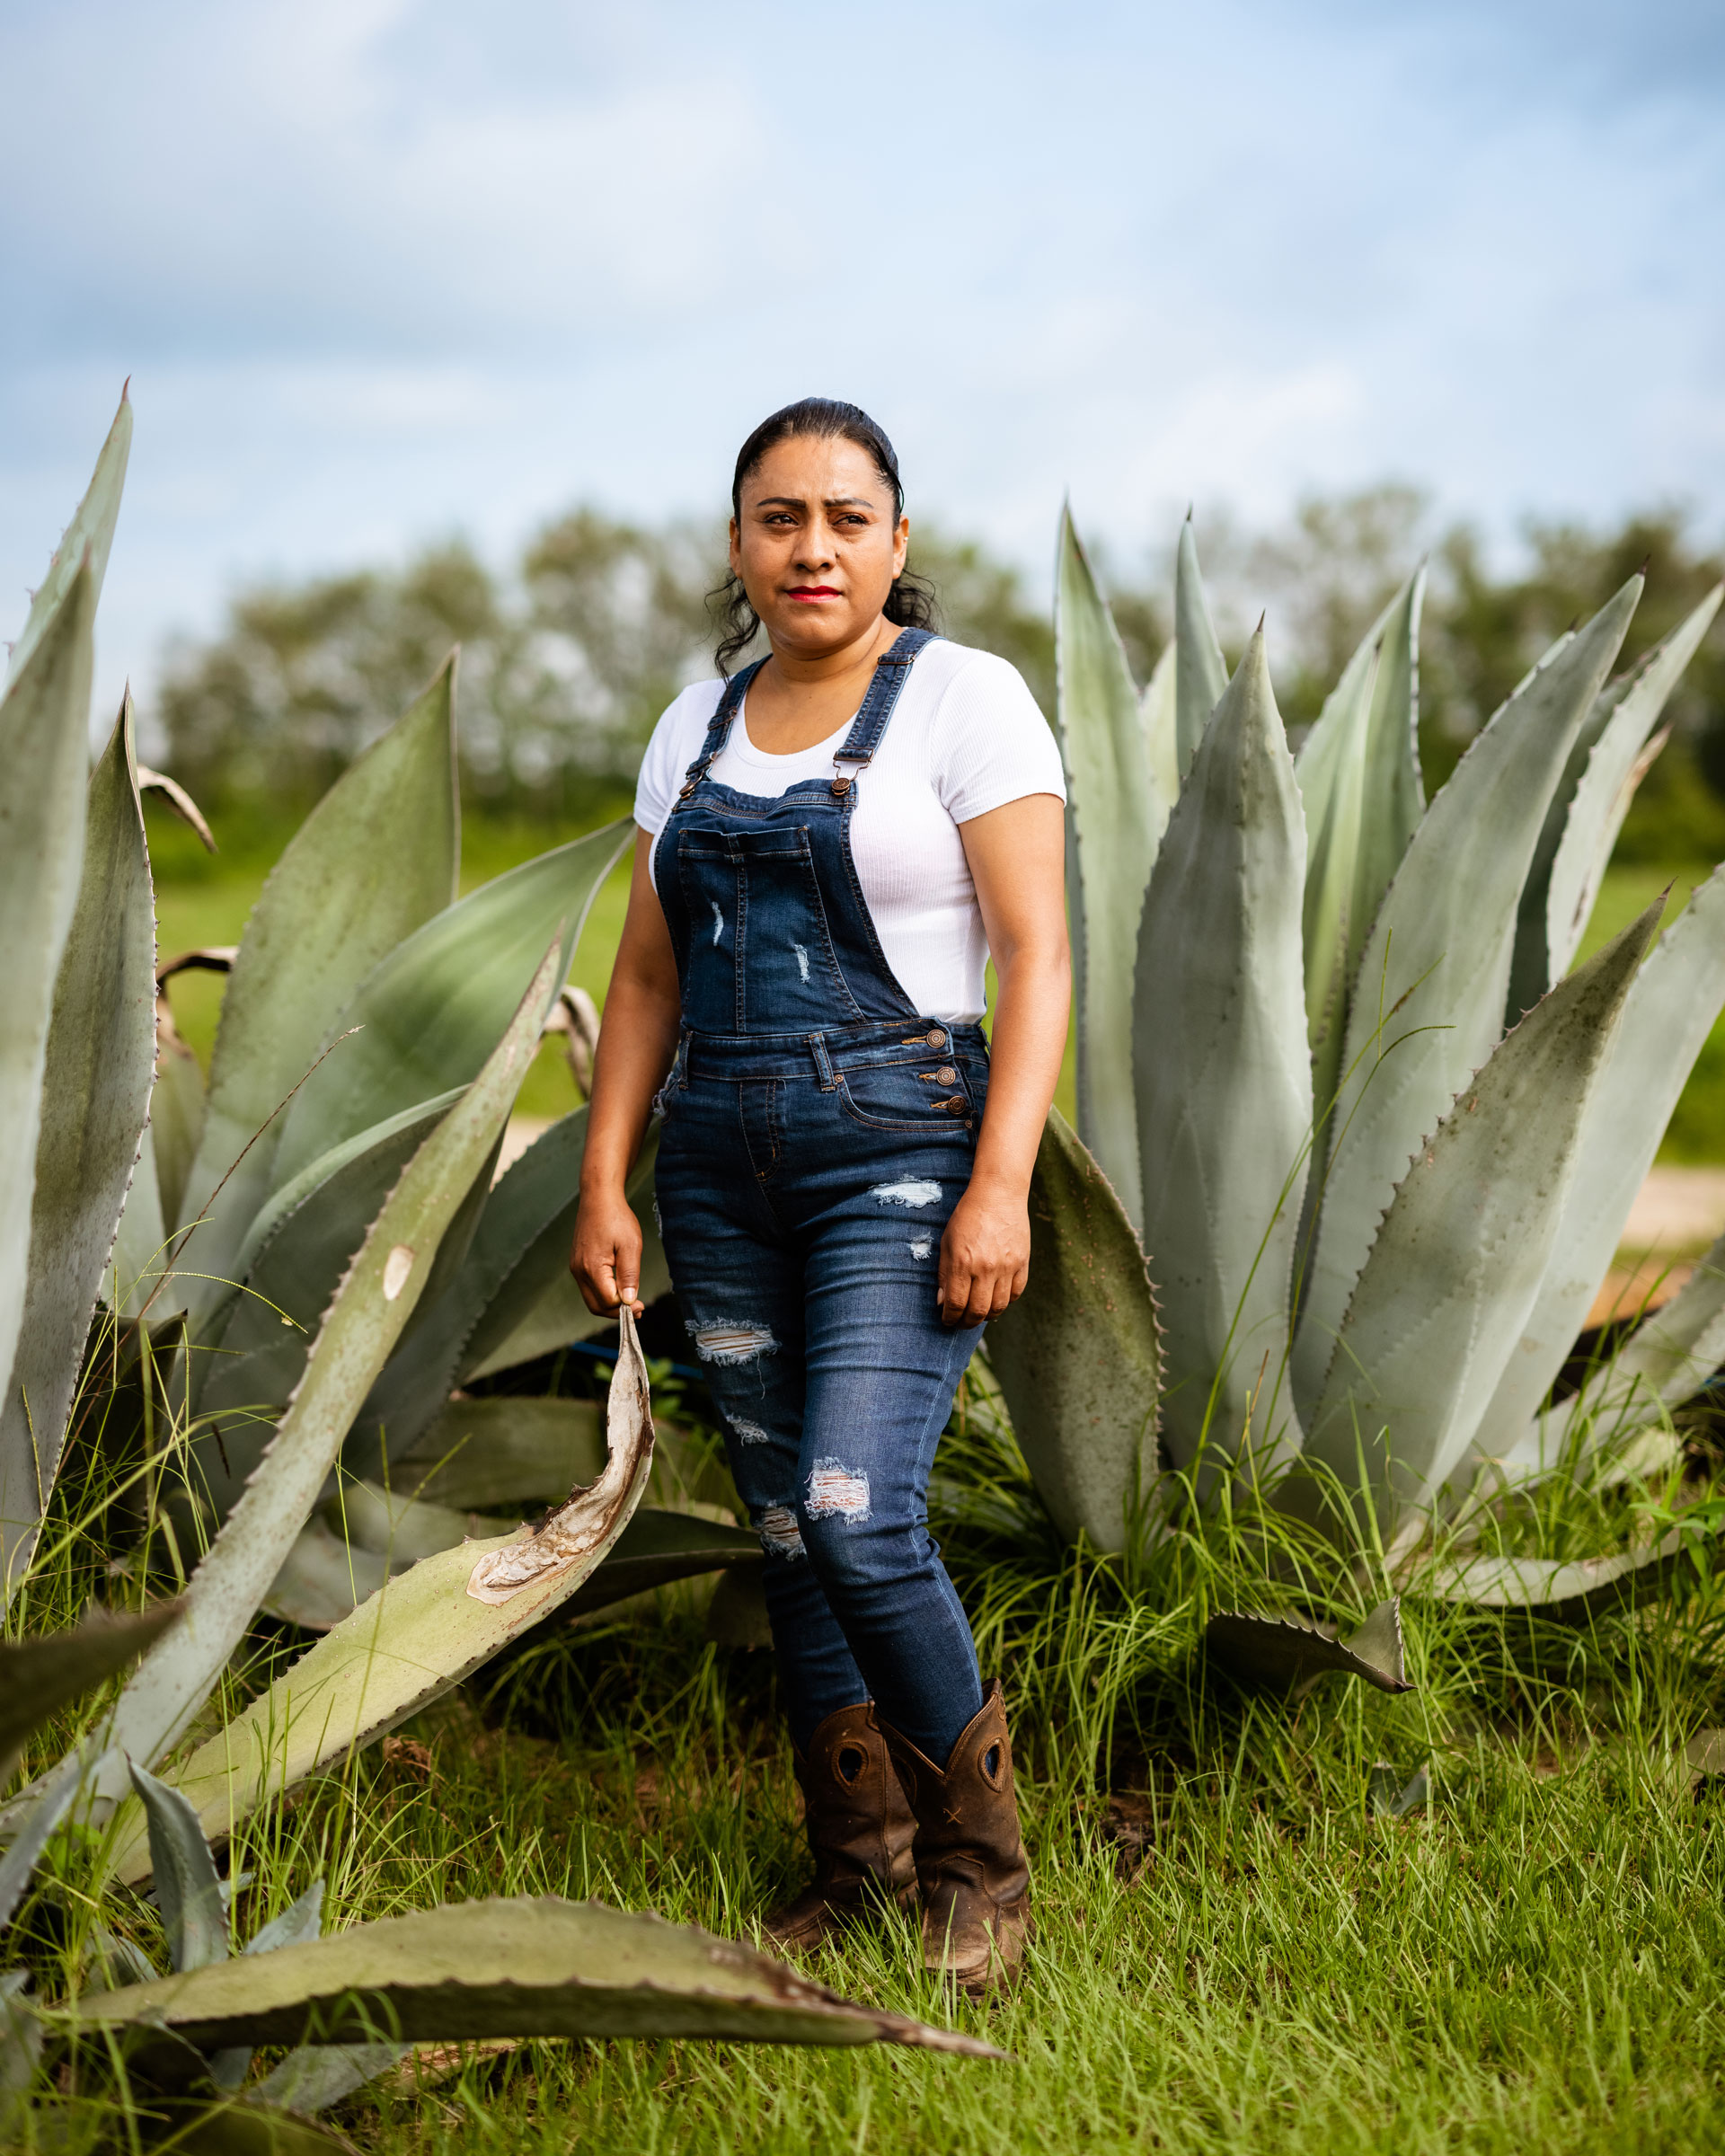 Silvia Moreno Ayala says she loves her work as a field crew leader for a South Georgia family owned farm, yet her doctor has warned her that this type of work is a threat to her health.  (José Ibarra Rizo for TIME)